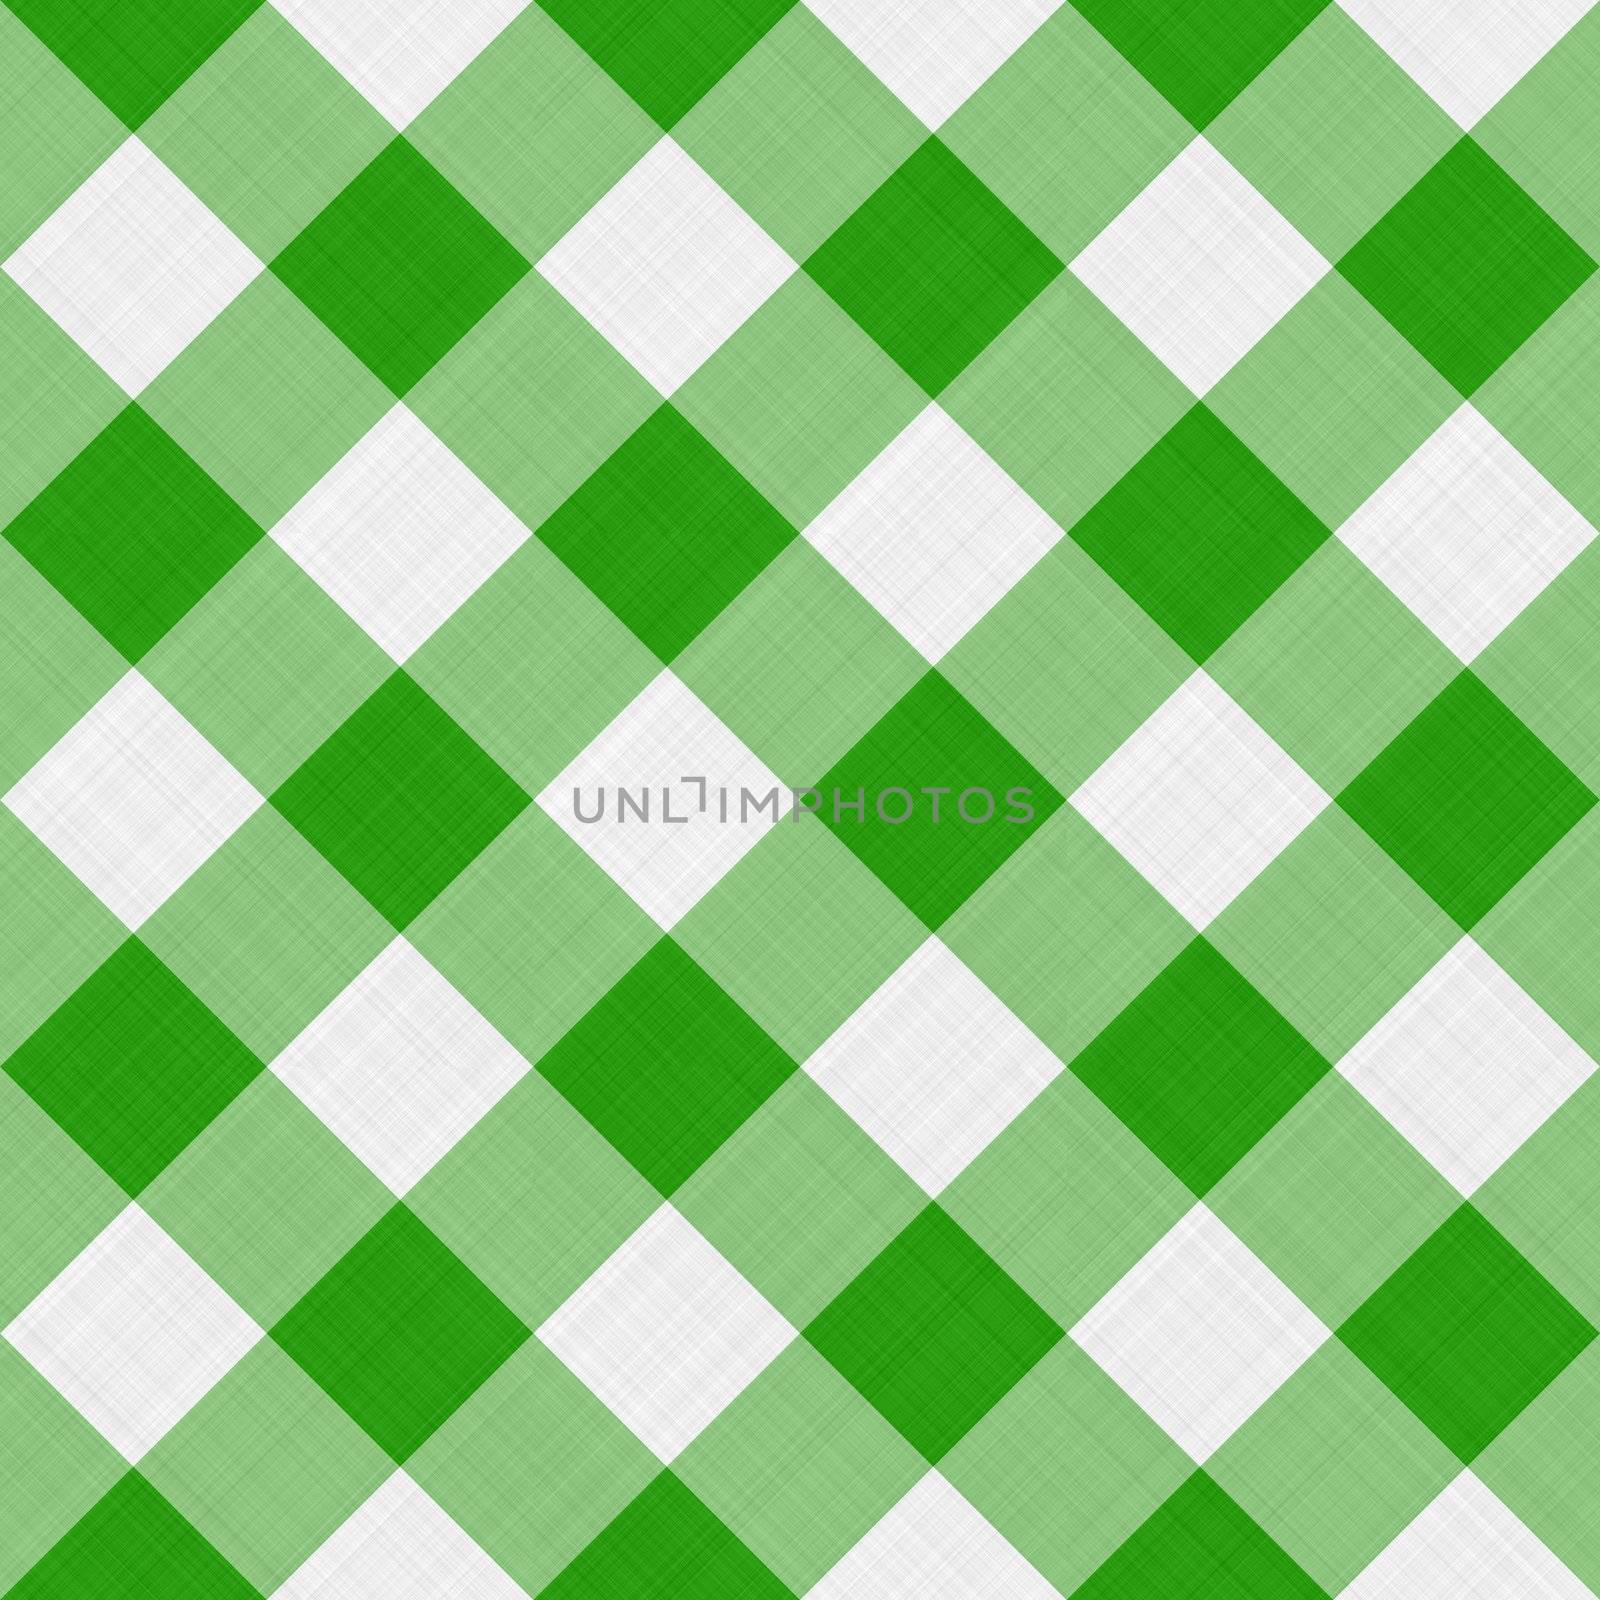 seamless diagonal picnic gingham pattern in fresh green and white